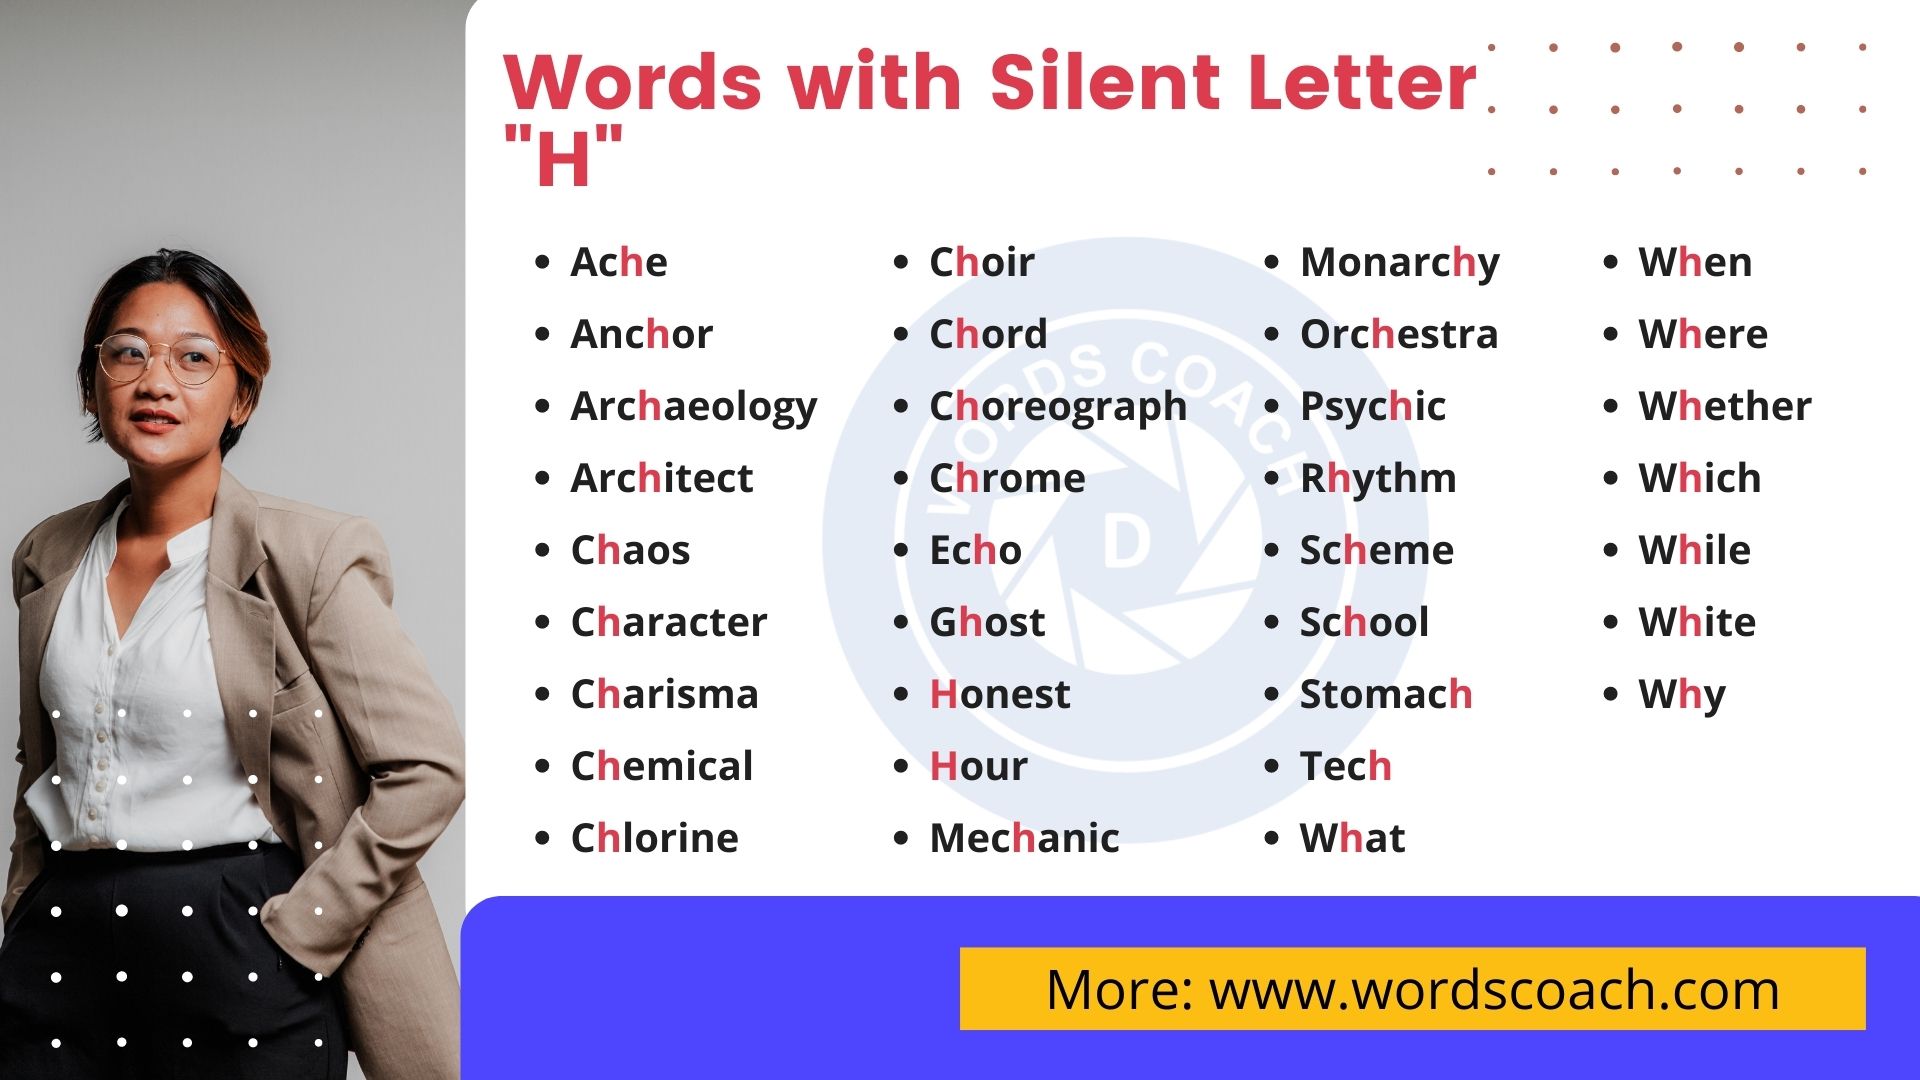 Words with Silent Letter H - wordscoach.com